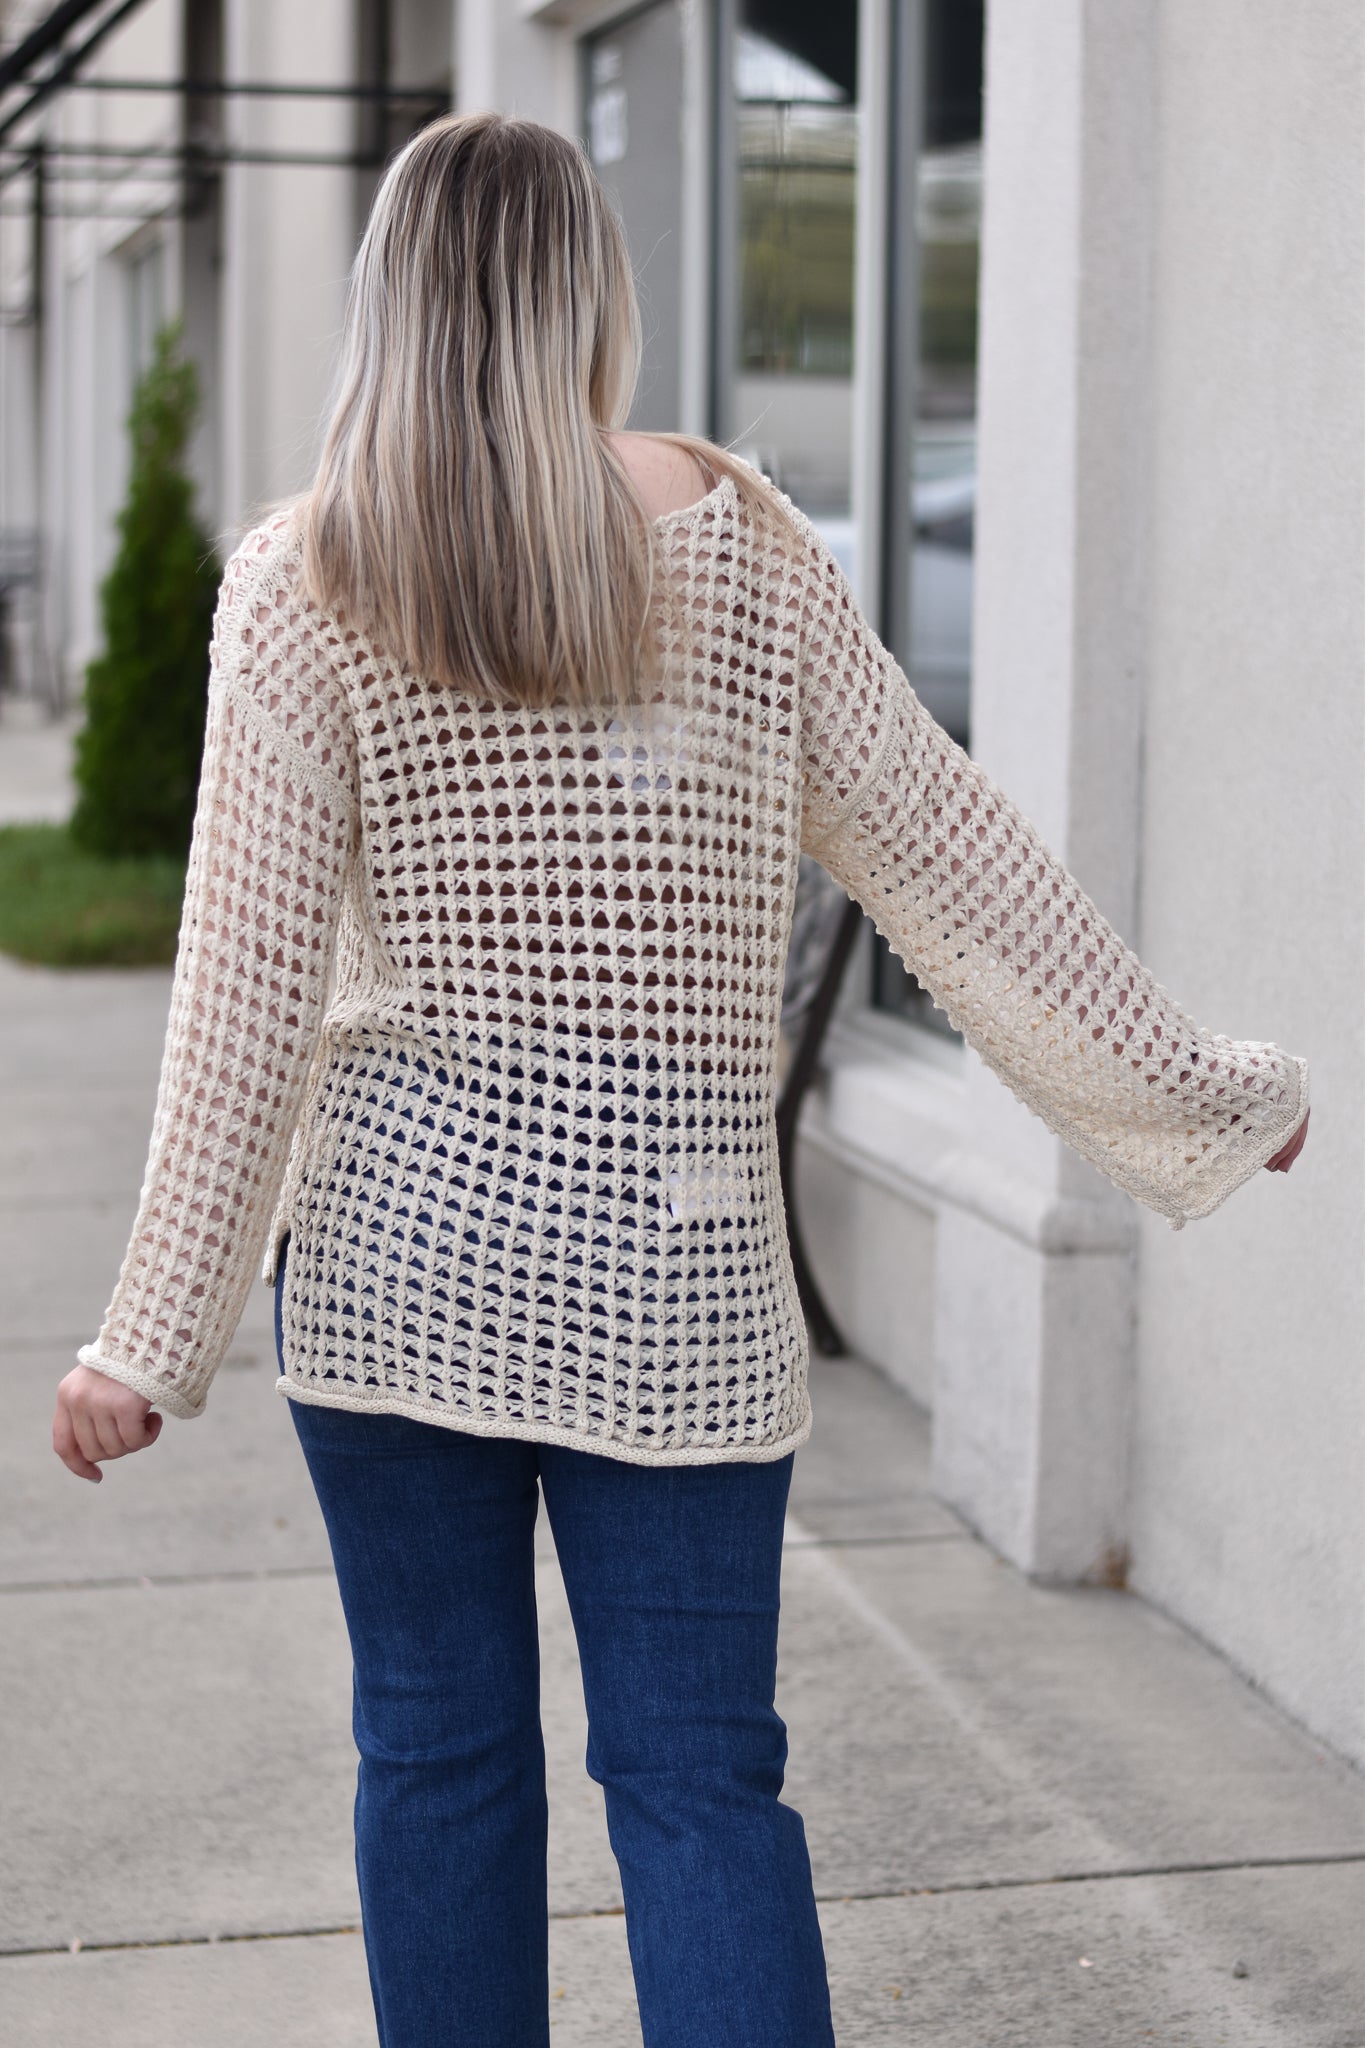 Chill Vibes Crochet Pull Over